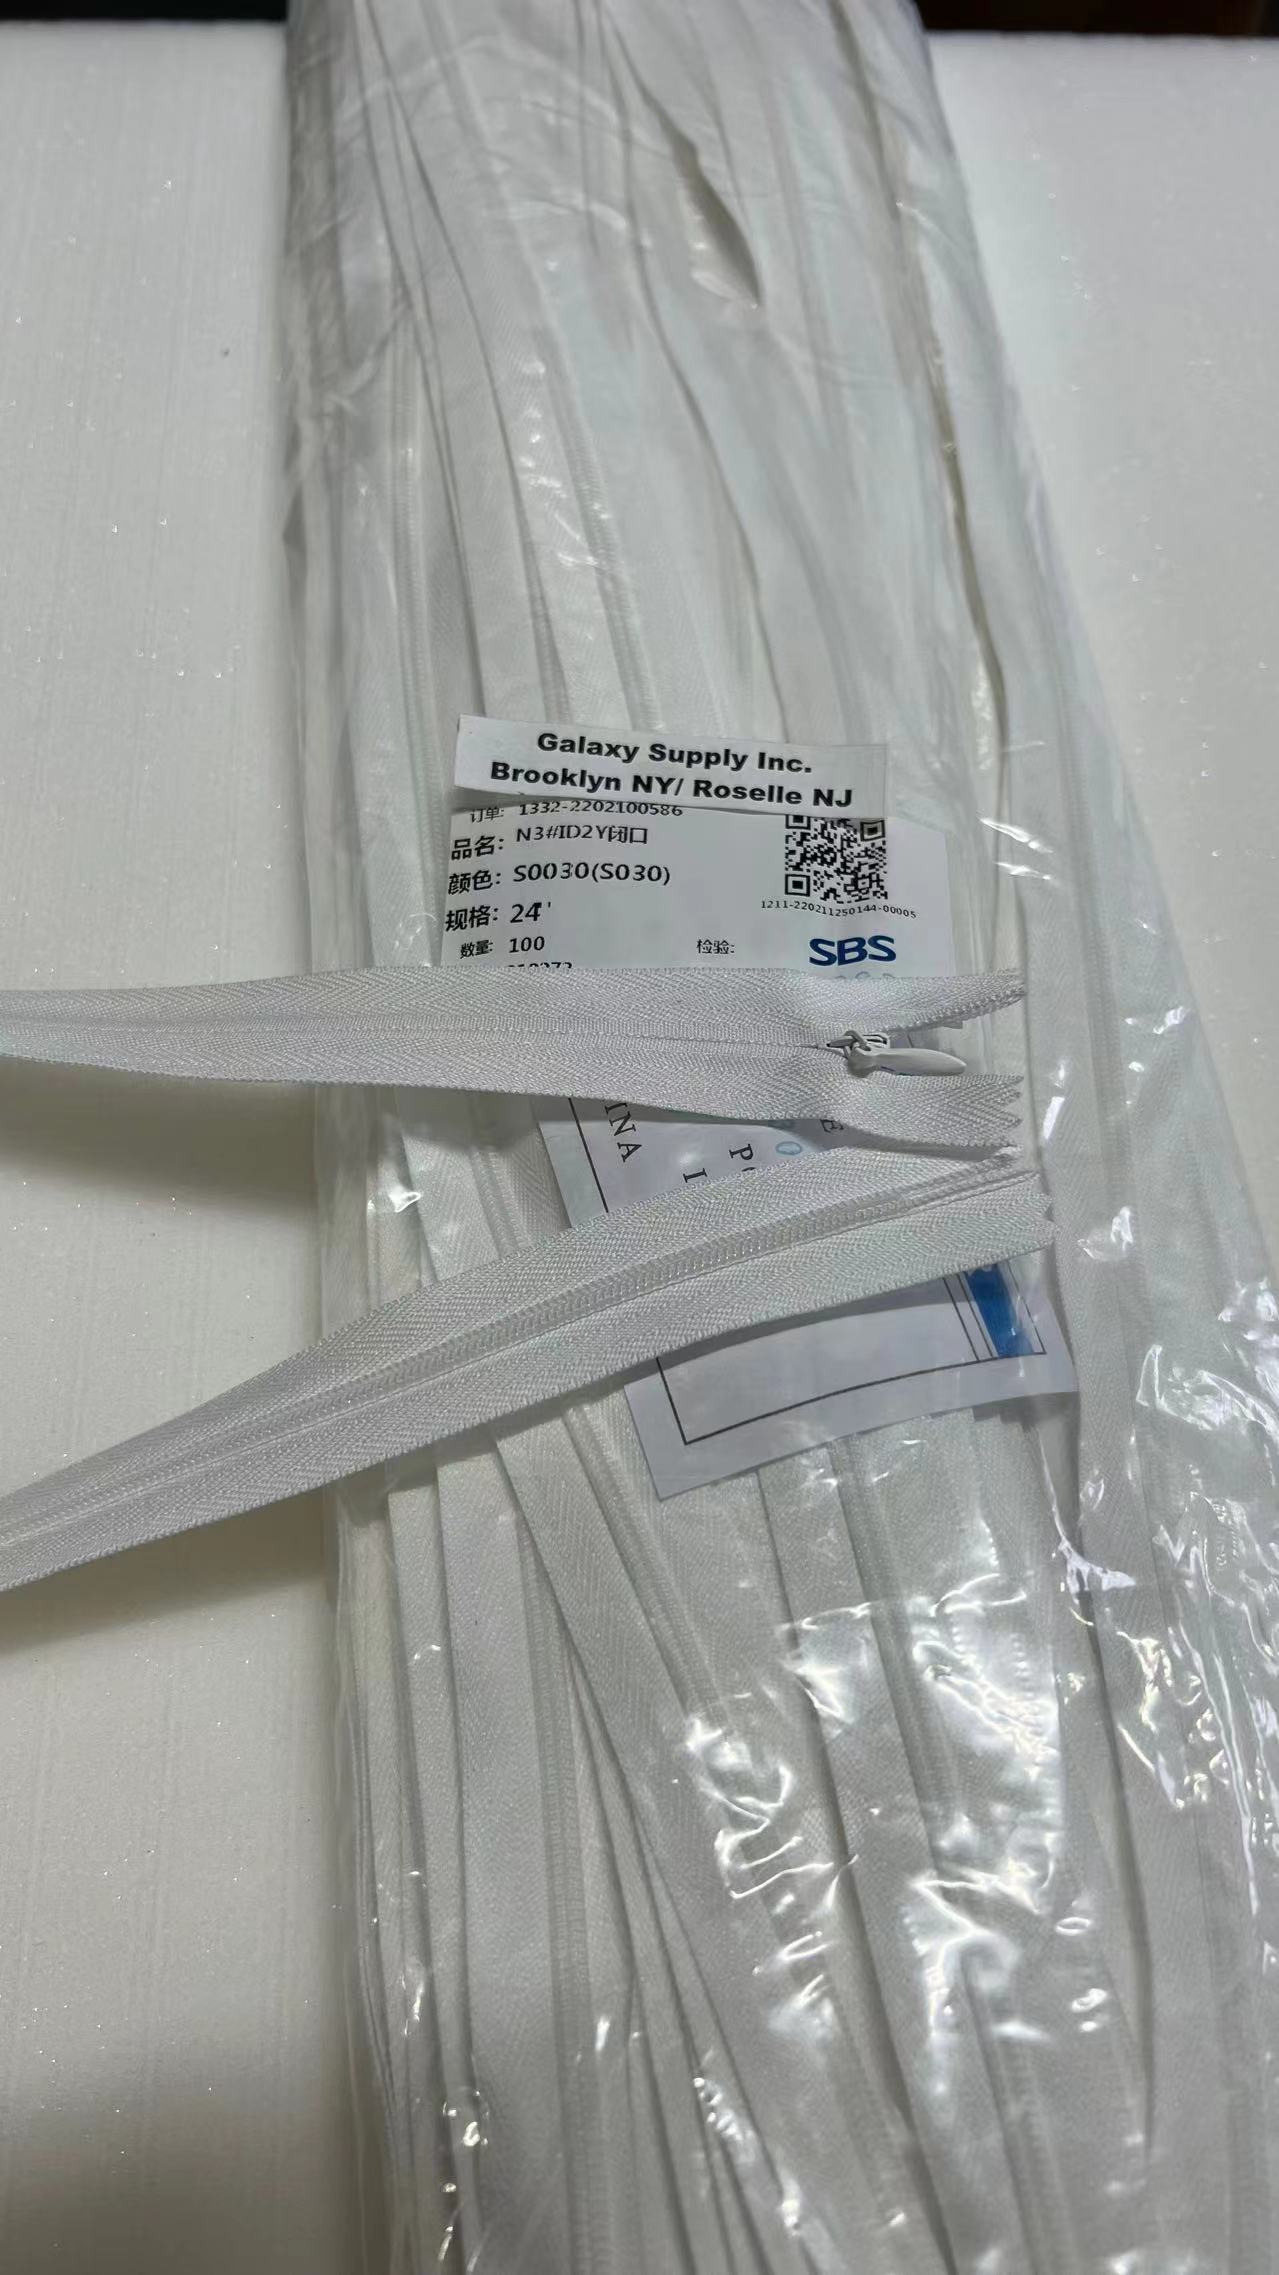 SBS #3 Invisible Nylon Coil Non-Separating ( Close End ) Upholstery Zipper & Sliders ( Sold By 1 / 20 Pcs )